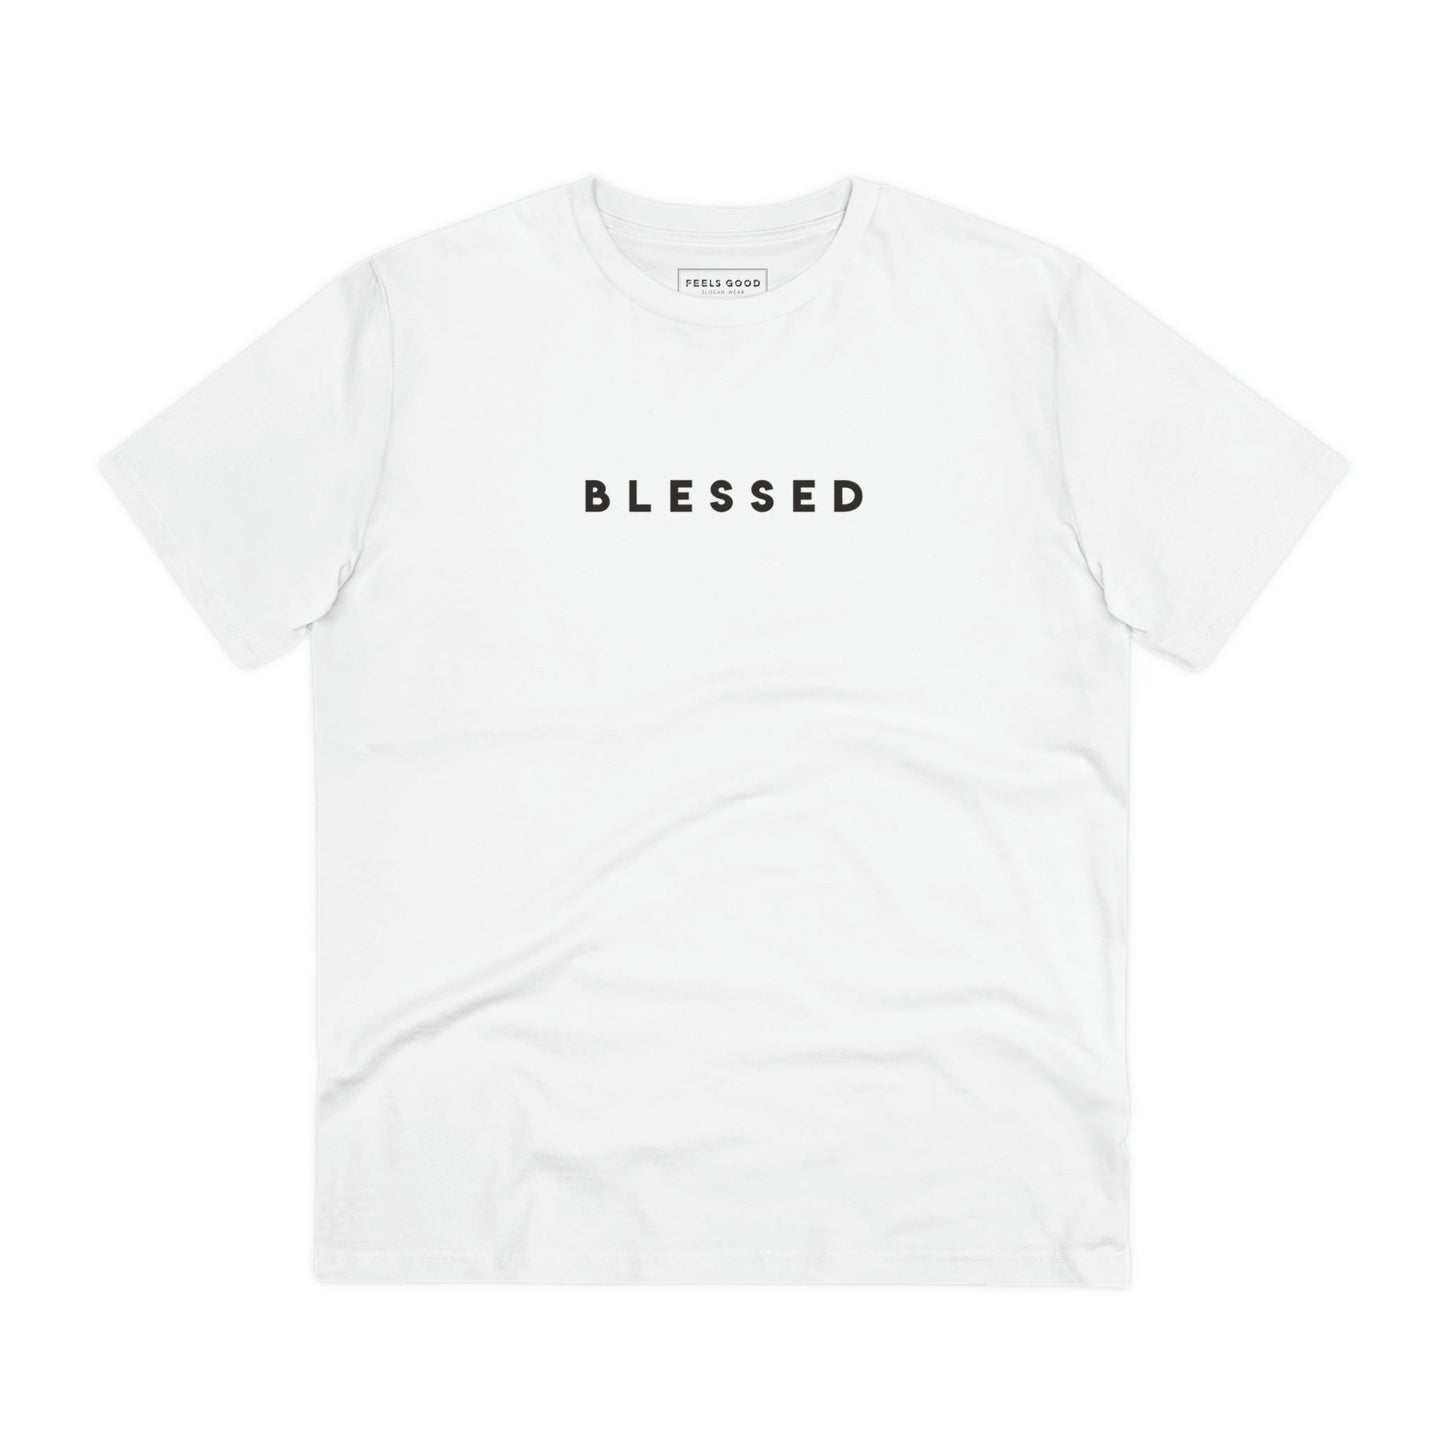 Positive 'Blessed' Organic Cotton T-shirt - Eco Tee